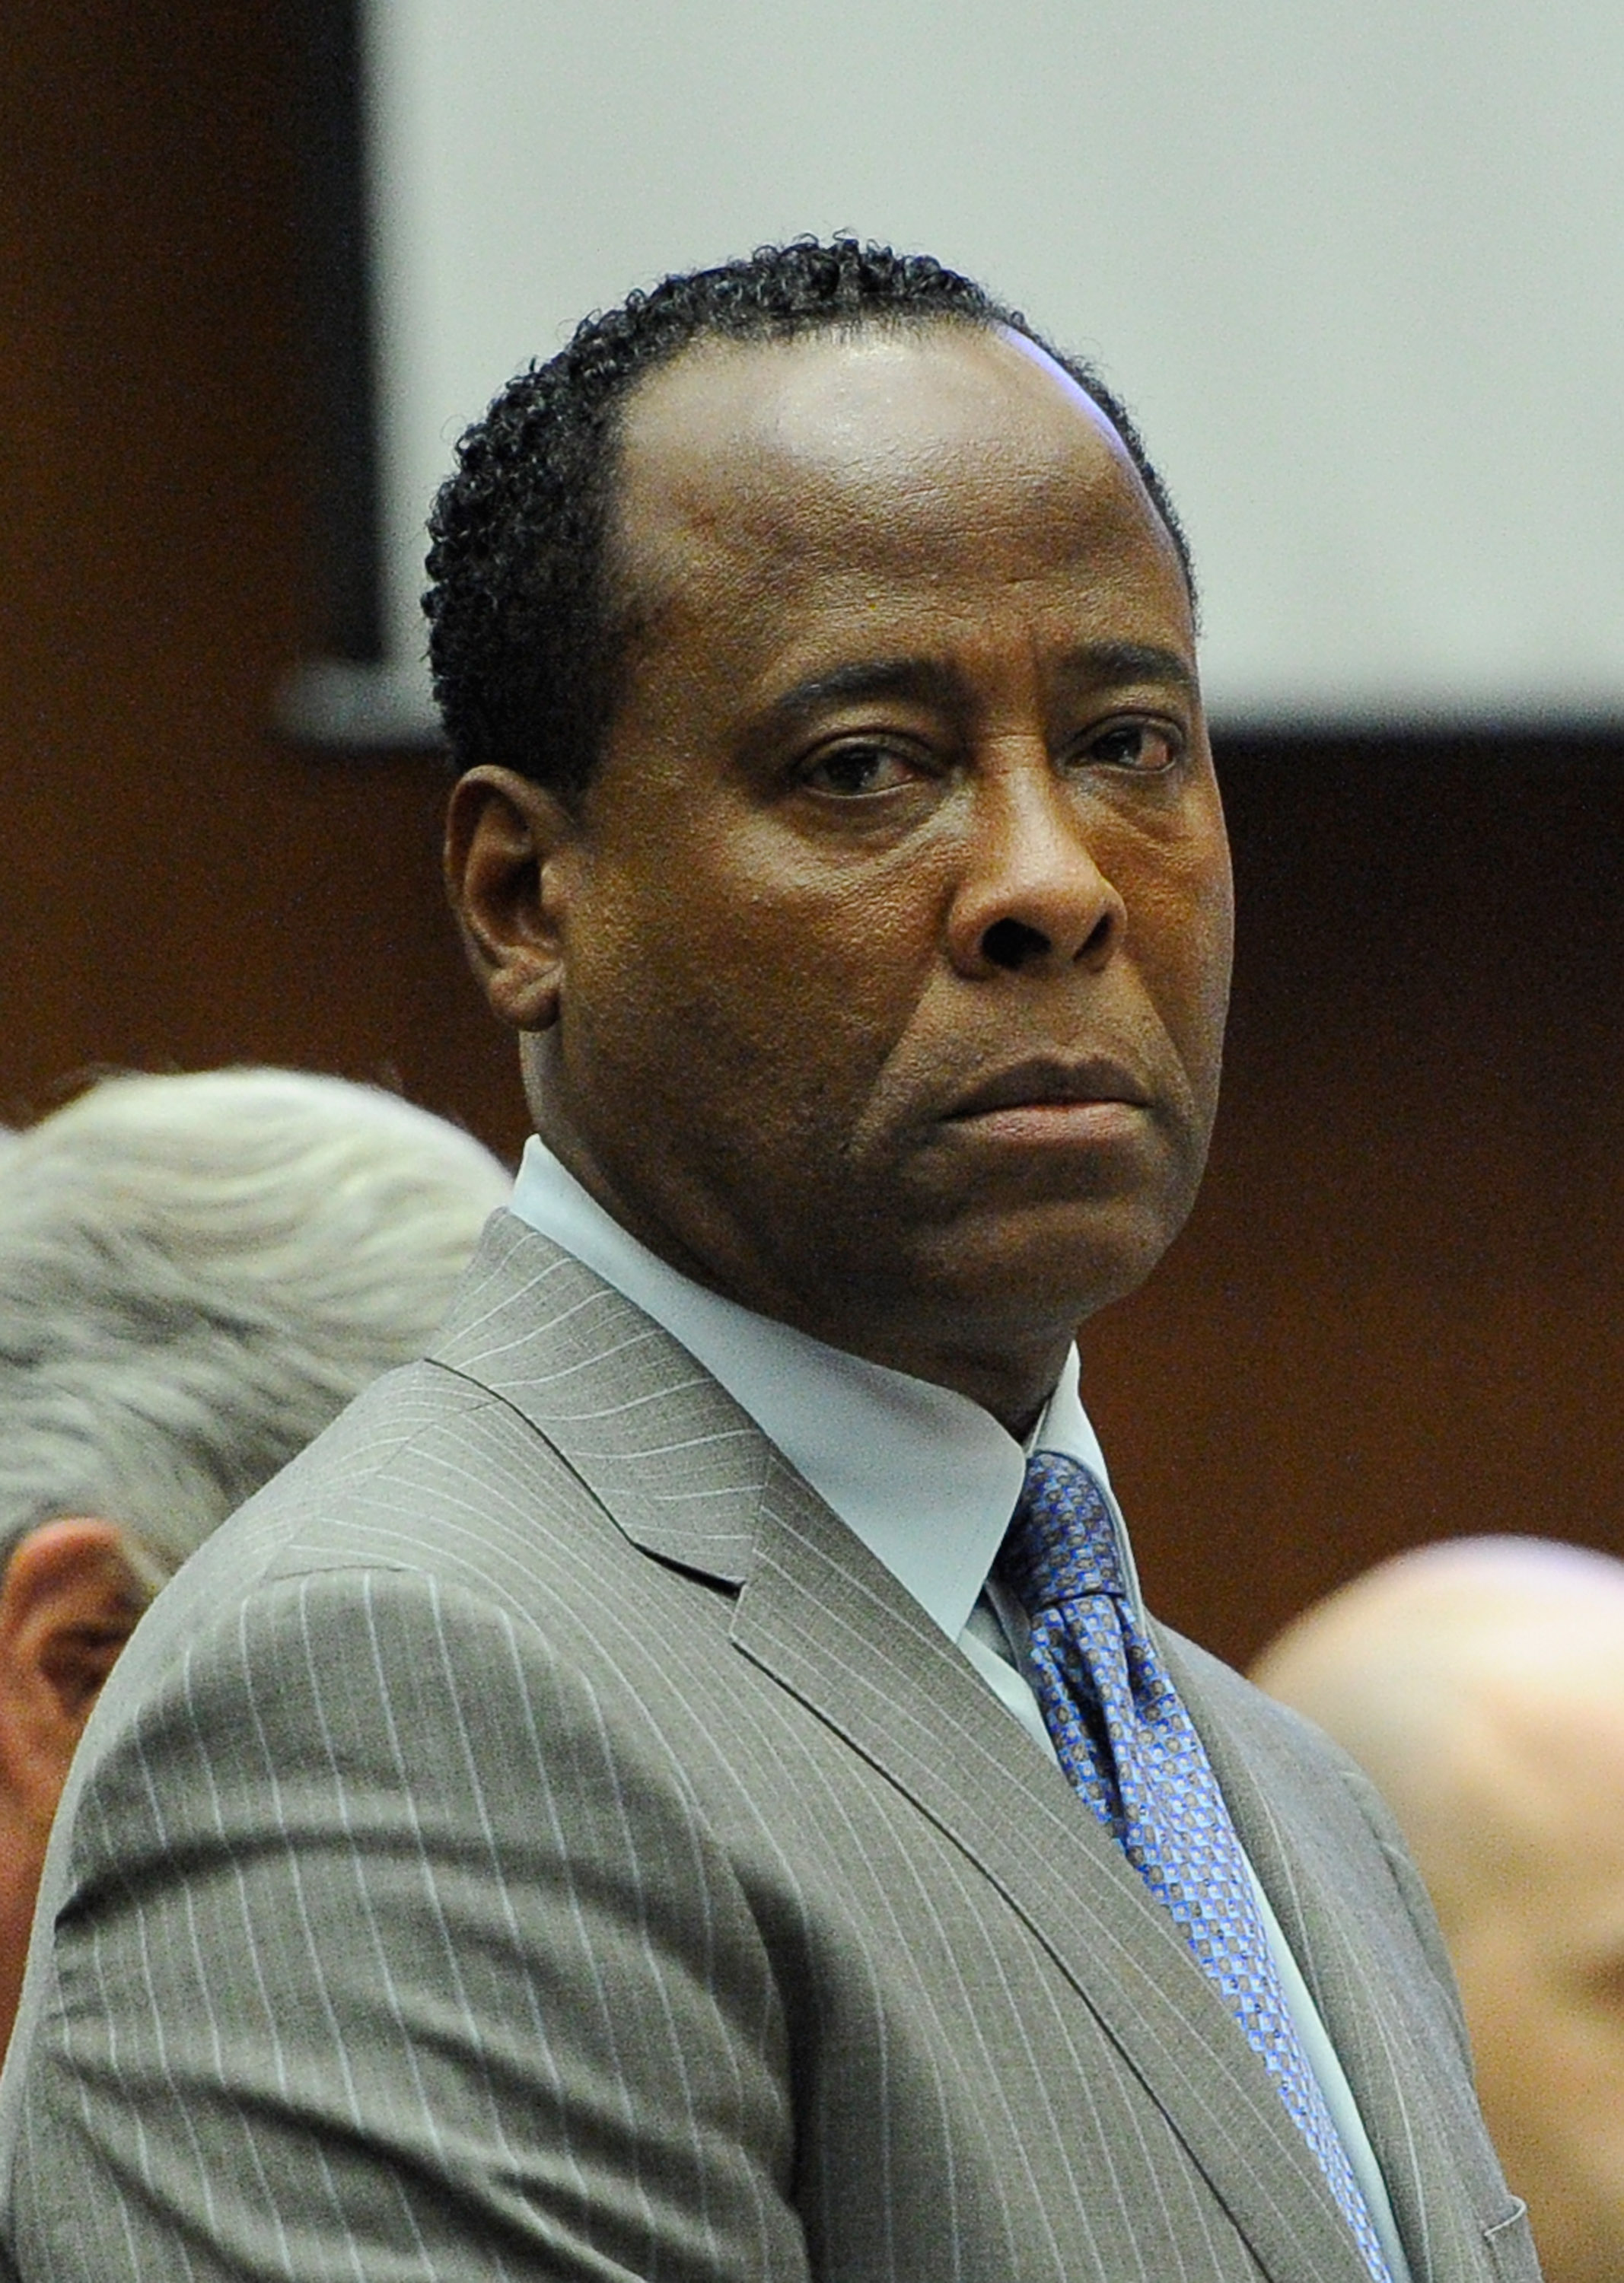 Dr. Conrad Murray waits to leave the courtroom for the day during the final stage of his defense in his involuntary manslaughter trial in the death of singer Michael Jackson at the Los Angeles Superior Court on November 1, 2011, in Los Angeles, California. | Source: Getty Images